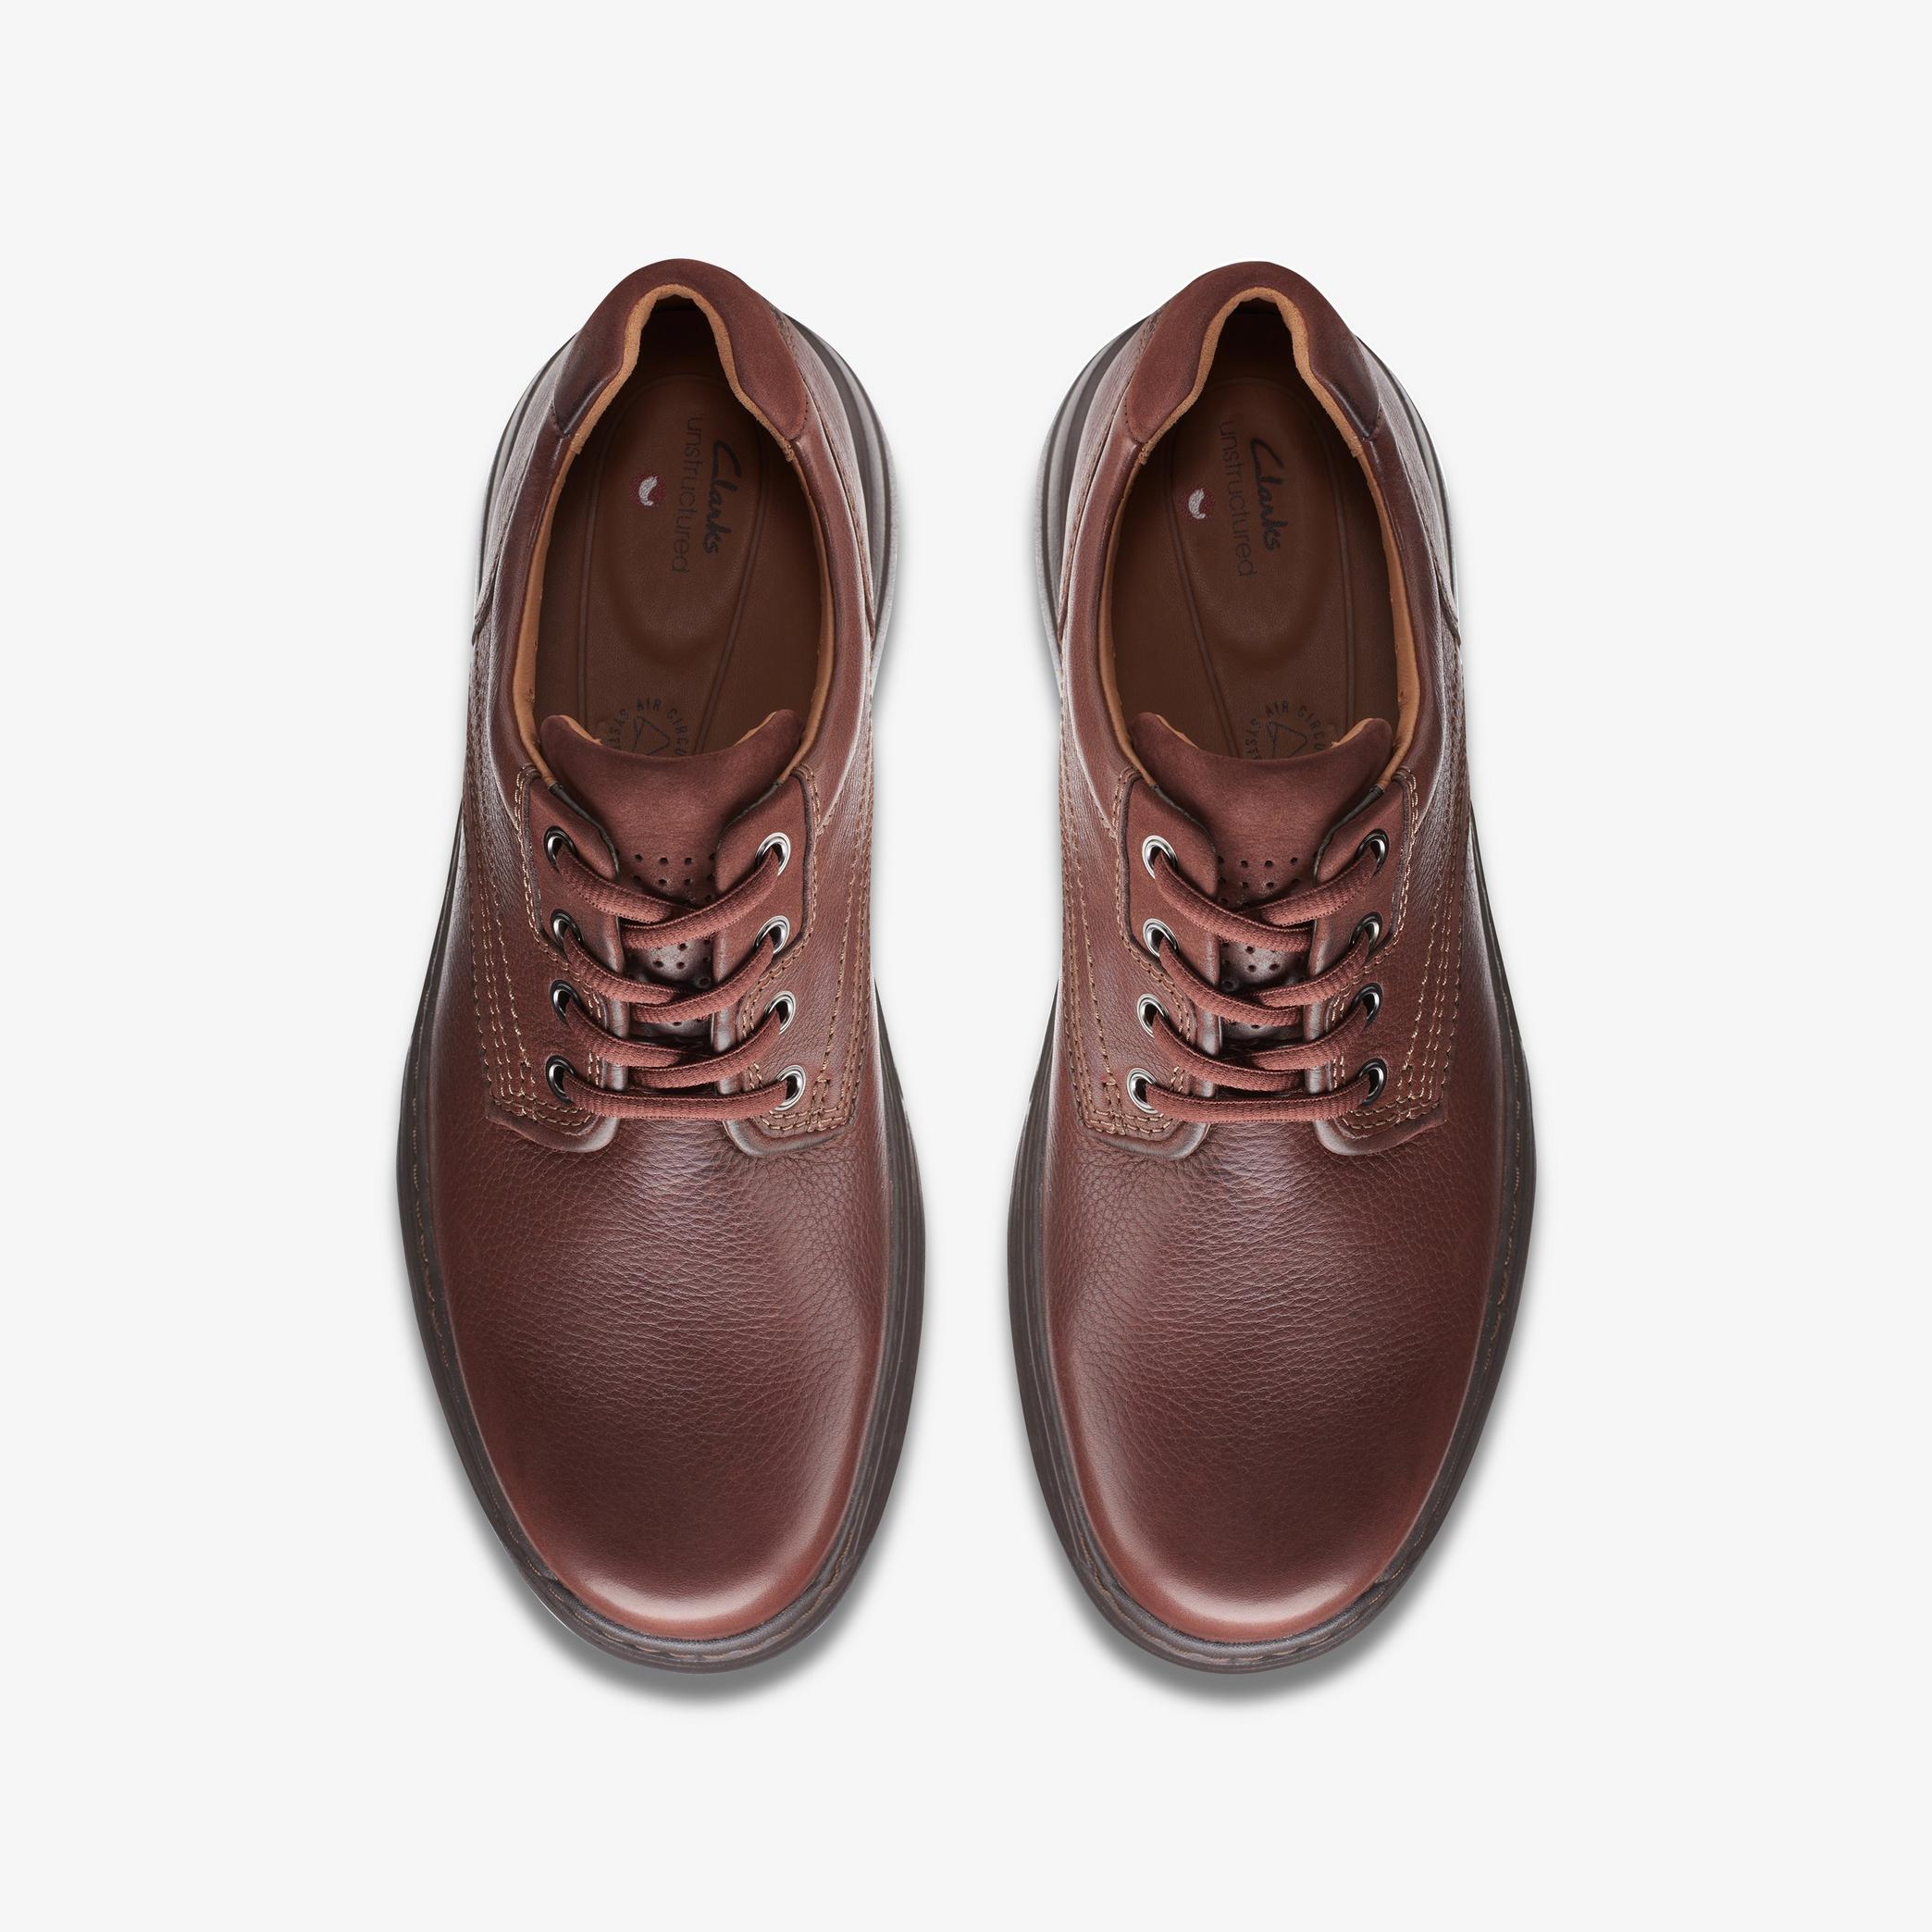 Men Un Brawley Pace Mahogany Tumbled Leather Shoes | Clarks US